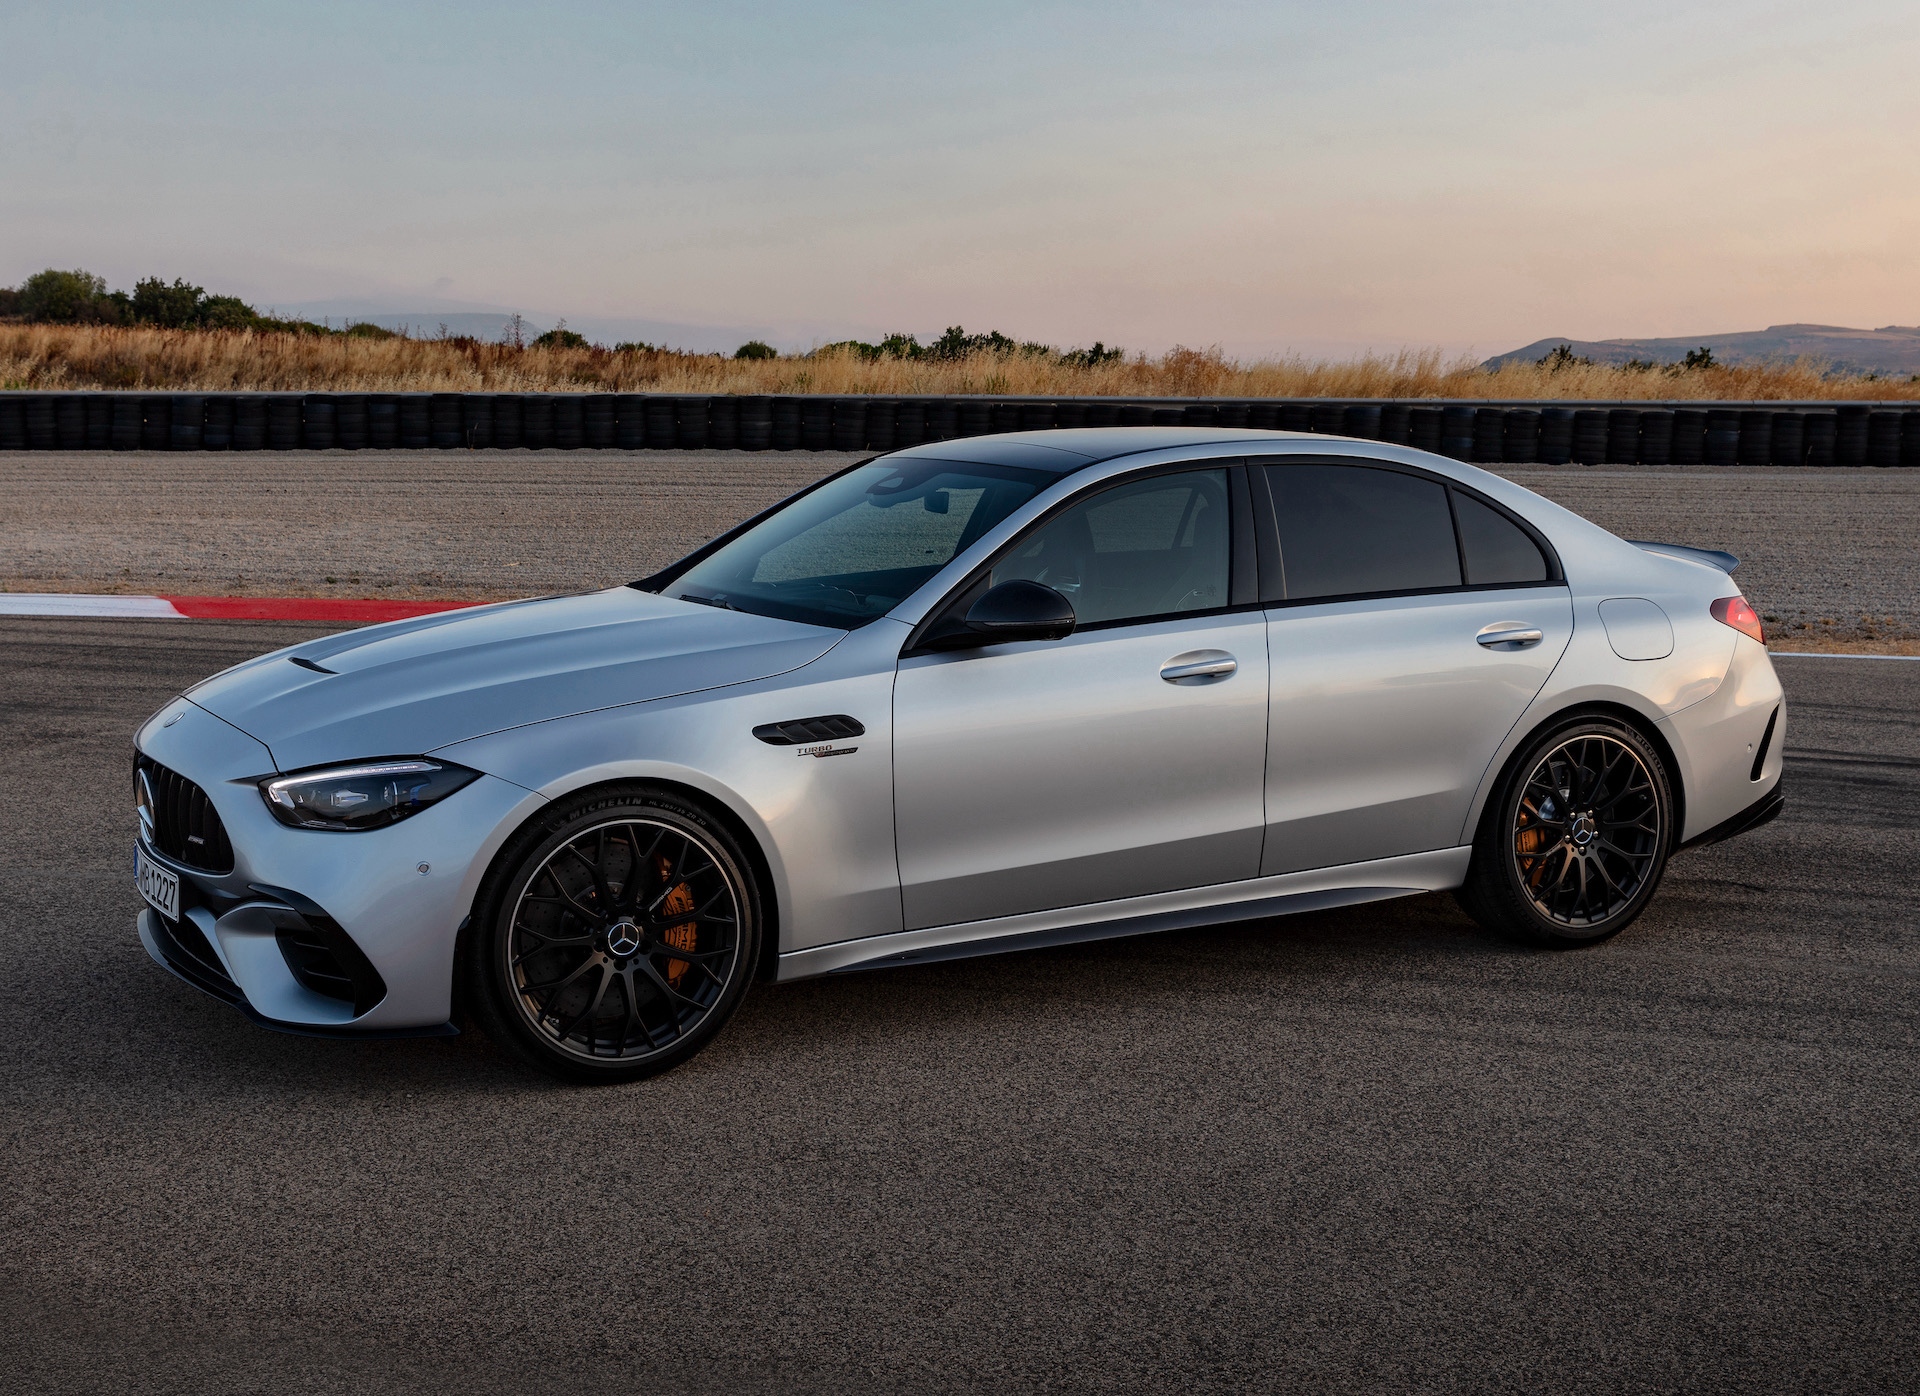 2023 Mercedes-AMG C 63 S E Performance revealed: 500kW, AWD, 0-100 in 3.4